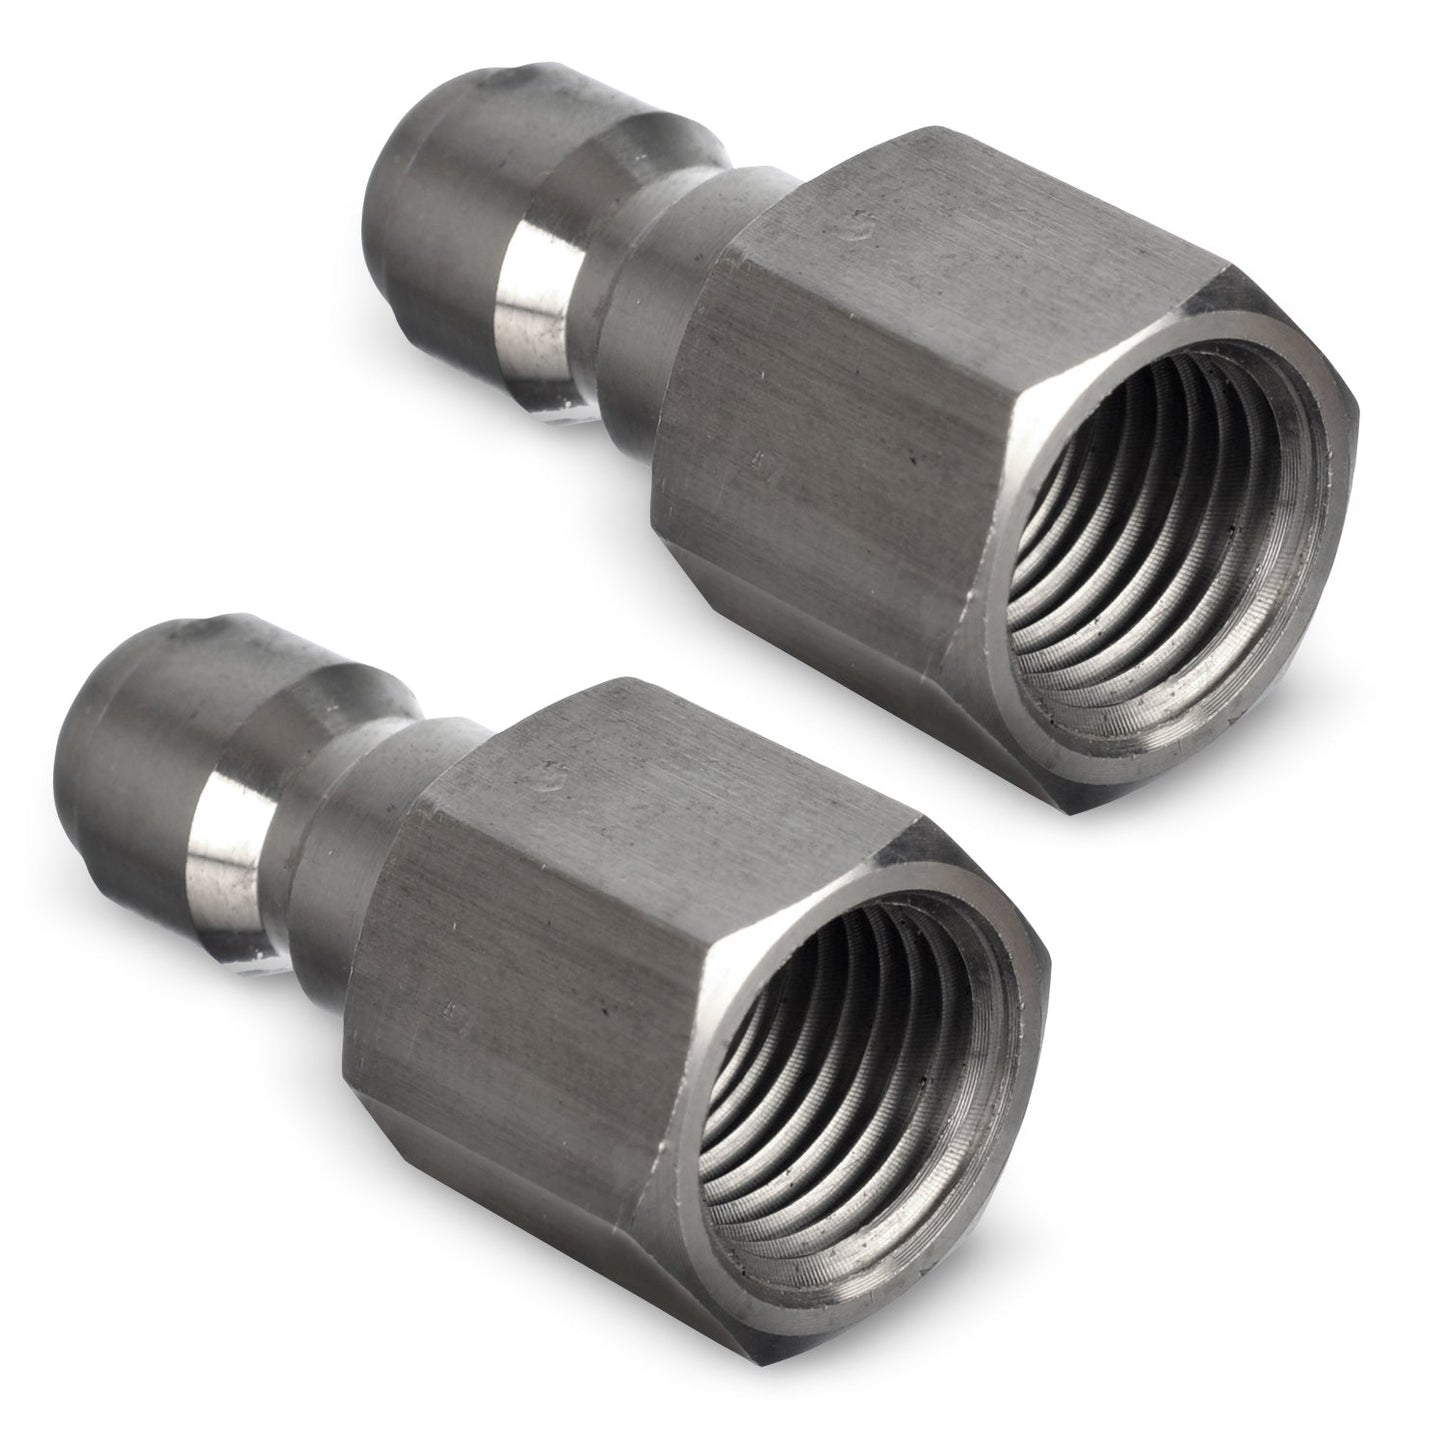 Stainless Steel Pressure Washer Quick Connect Plugs Set Of 2 | Female